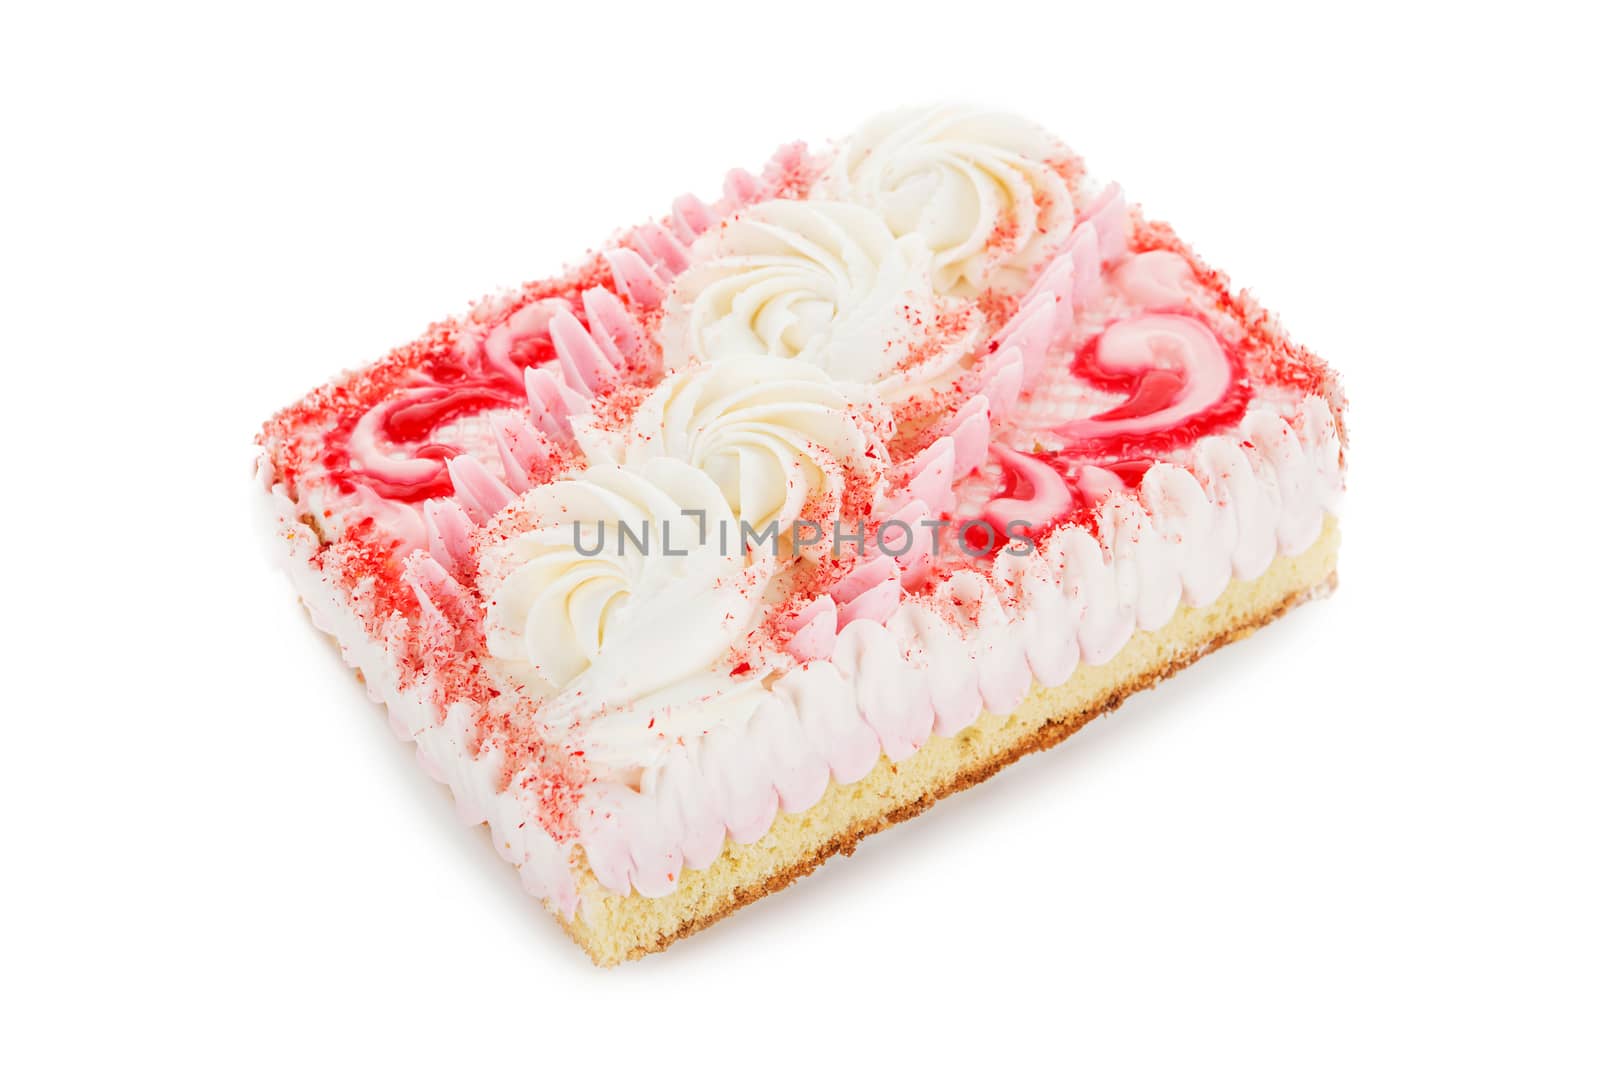 biscuit cake decorated with cream flowers isolated on white by natazhekova